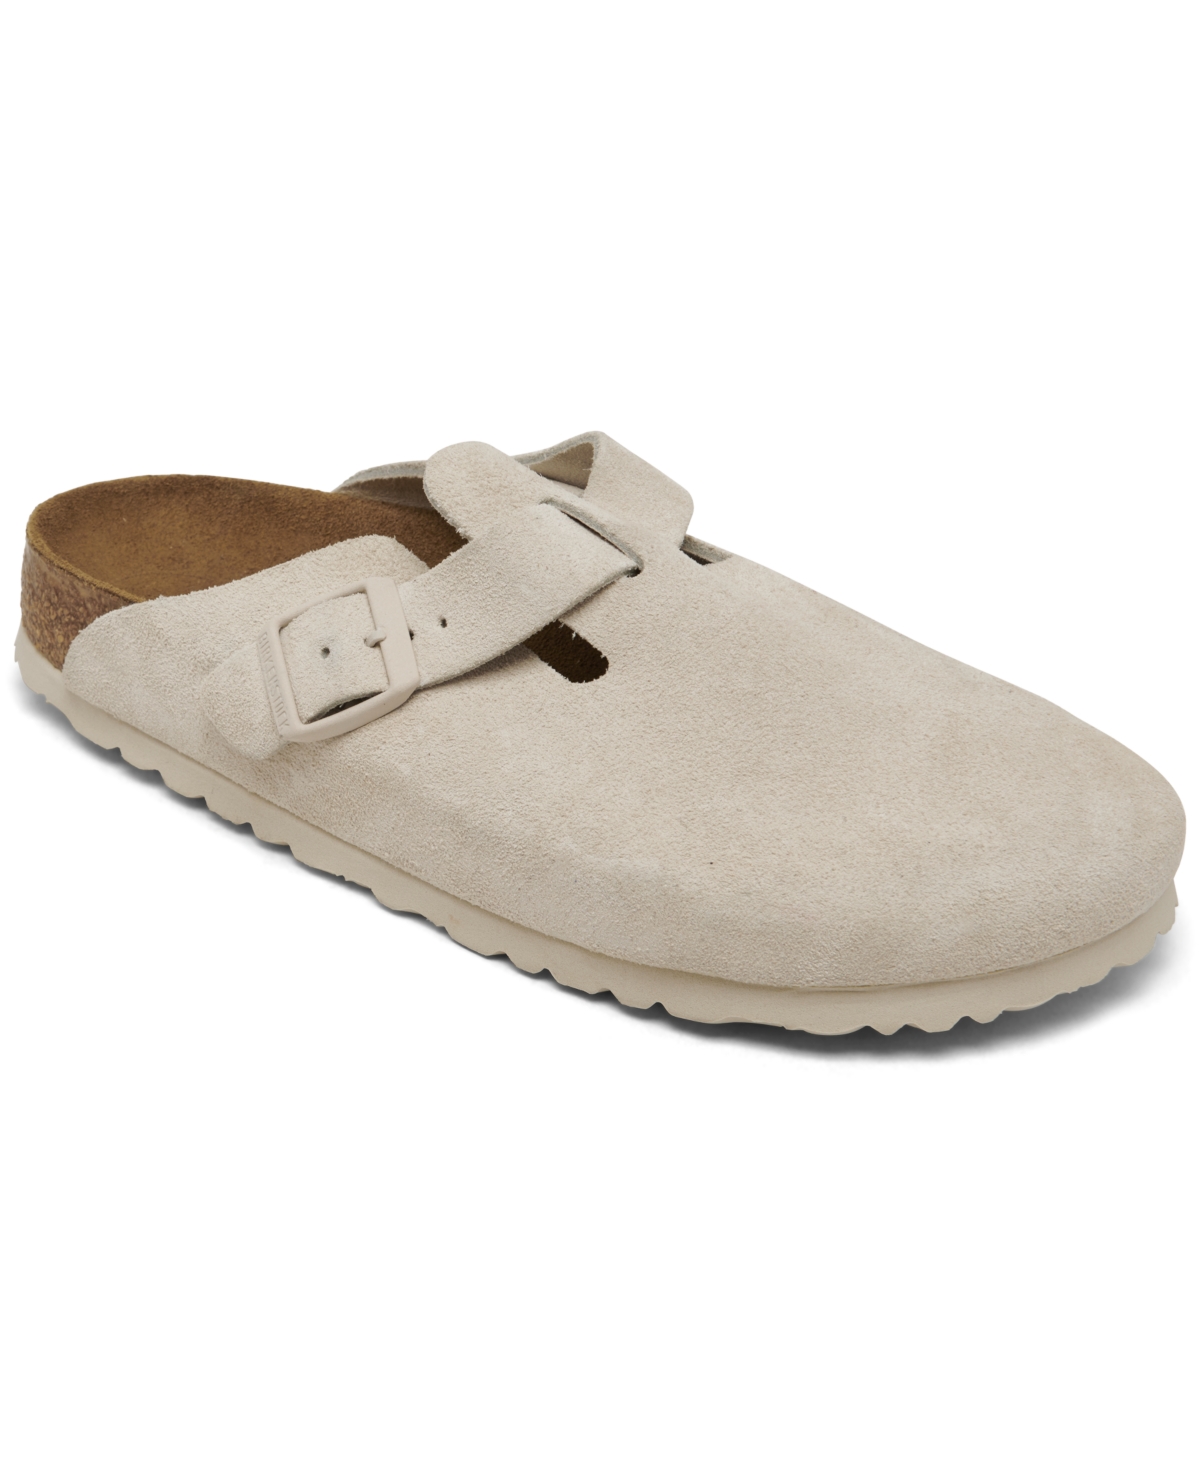 Women's Boston Soft Footbed Suede Leather Clogs from Finish Line - Antique-Like White